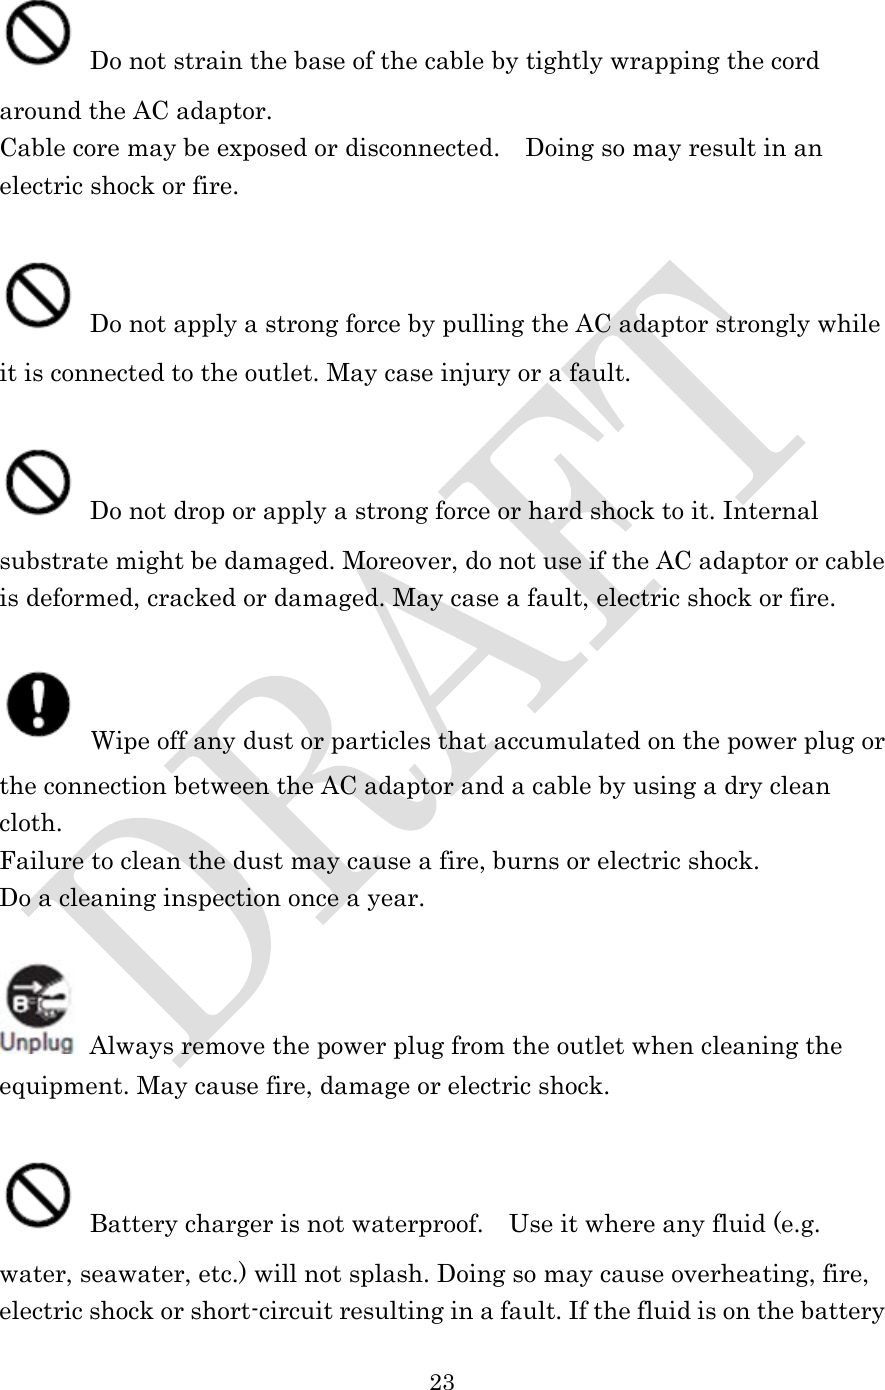  23   Do not strain the base of the cable by tightly wrapping the cord around the AC adaptor. Cable core may be exposed or disconnected.    Doing so may result in an electric shock or fire.   Do not apply a strong force by pulling the AC adaptor strongly while it is connected to the outlet. May case injury or a fault.   Do not drop or apply a strong force or hard shock to it. Internal substrate might be damaged. Moreover, do not use if the AC adaptor or cable is deformed, cracked or damaged. May case a fault, electric shock or fire.   Wipe off any dust or particles that accumulated on the power plug or the connection between the AC adaptor and a cable by using a dry clean cloth. Failure to clean the dust may cause a fire, burns or electric shock. Do a cleaning inspection once a year.   Always remove the power plug from the outlet when cleaning the equipment. May cause fire, damage or electric shock.   Battery charger is not waterproof.    Use it where any fluid (e.g. water, seawater, etc.) will not splash. Doing so may cause overheating, fire, electric shock or short-circuit resulting in a fault. If the fluid is on the battery 